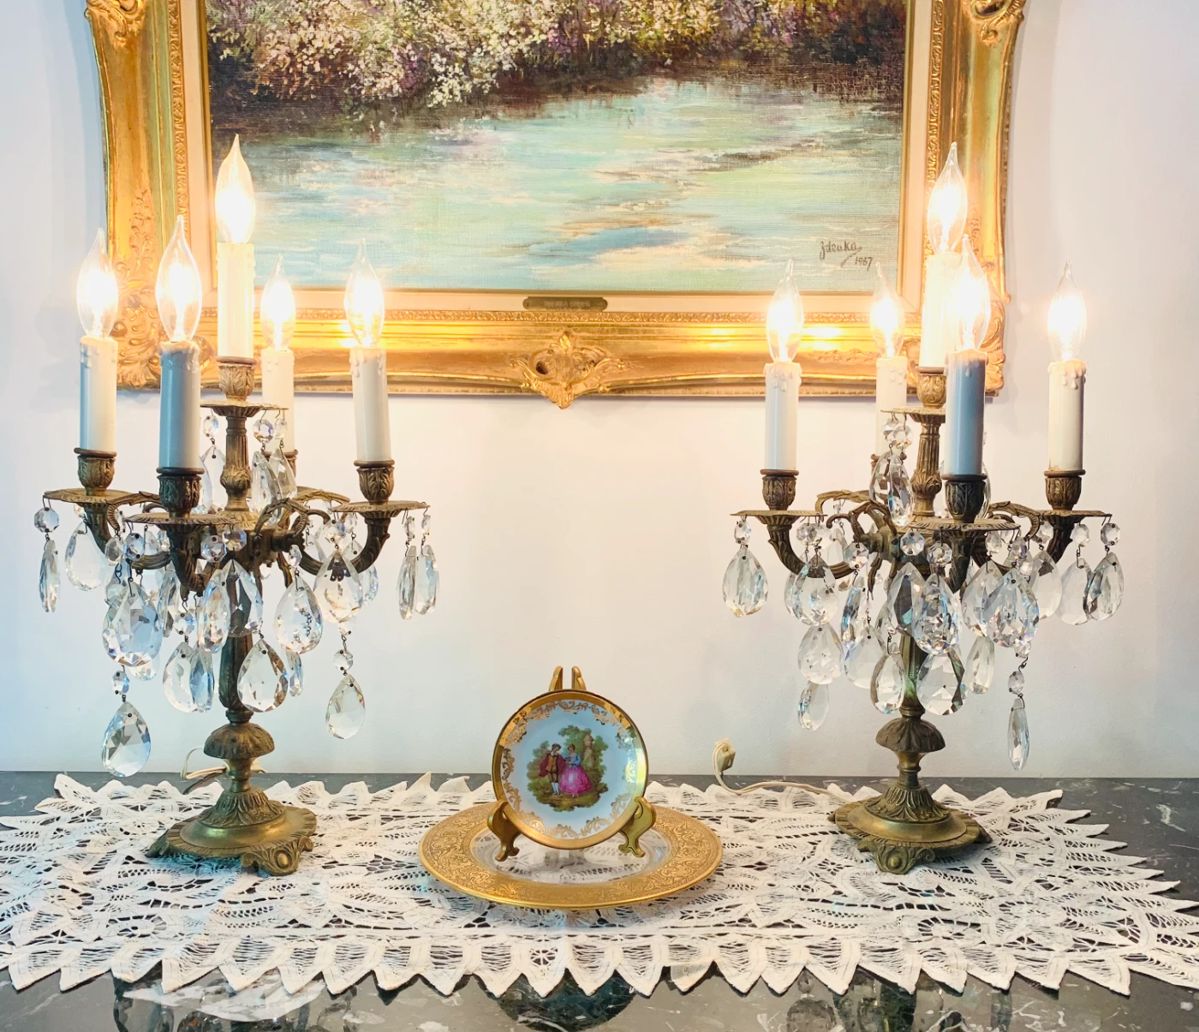 beautiful cast iron electric candelabra ornamented with crystals (back ground oil painting - NFS)